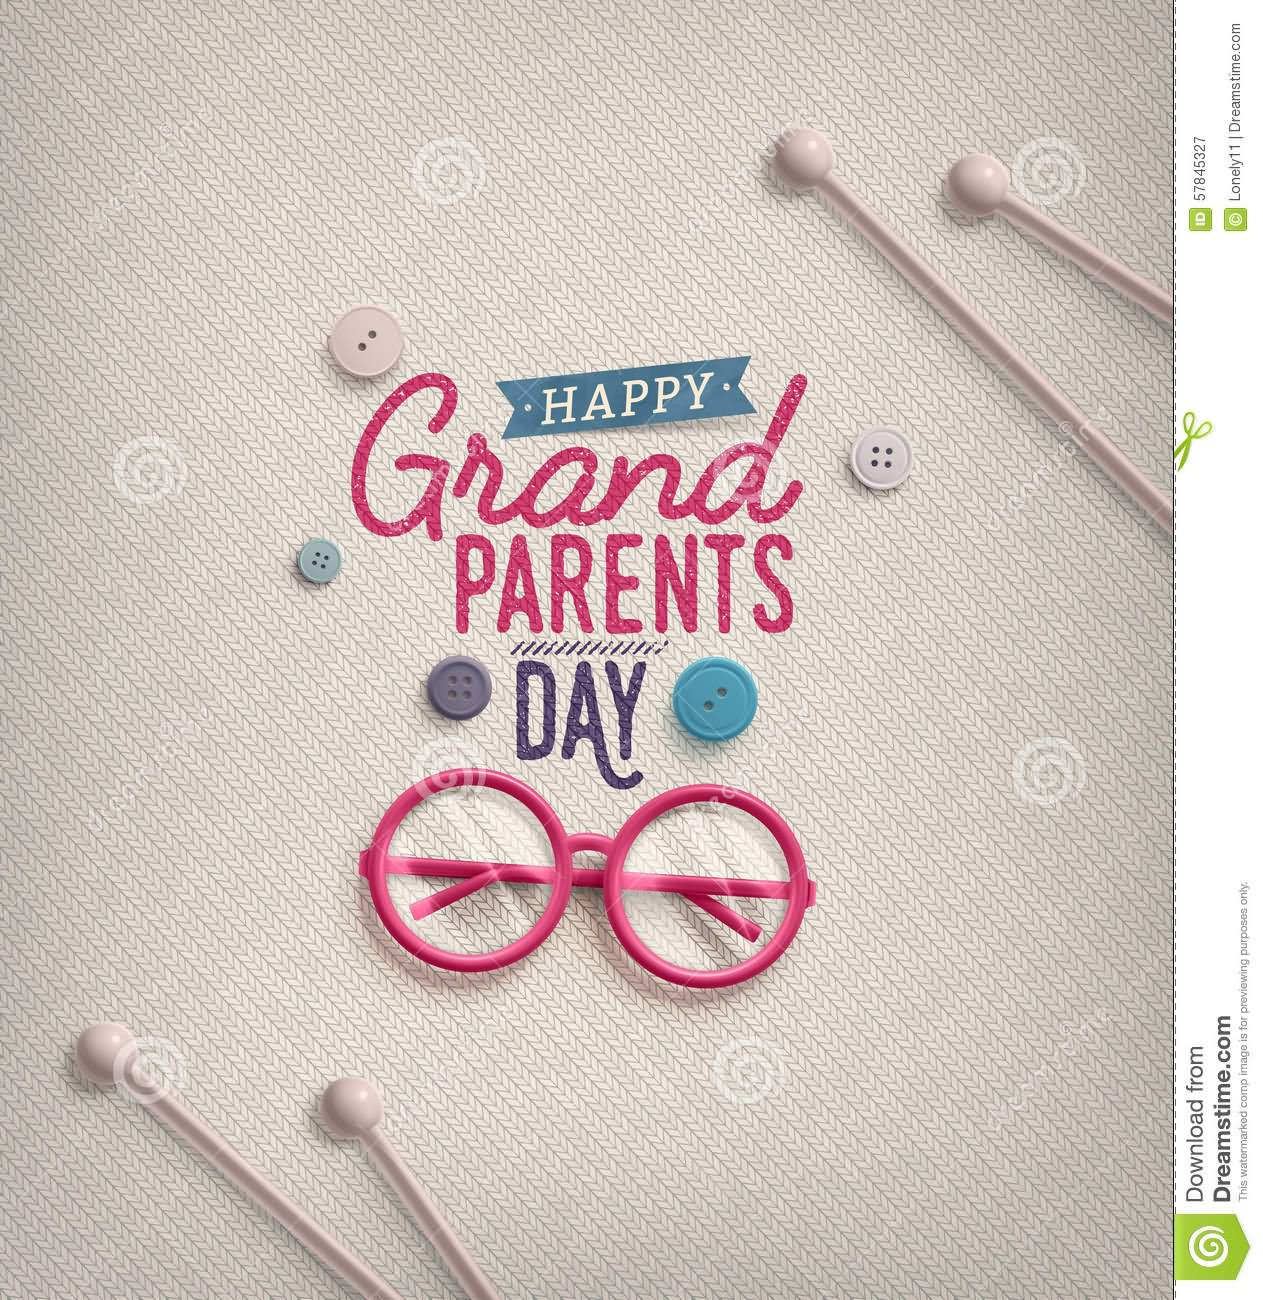 Birthday Card Ideas For Grandma 35 Most Beautiful Grandparents Day Greeting Card Images